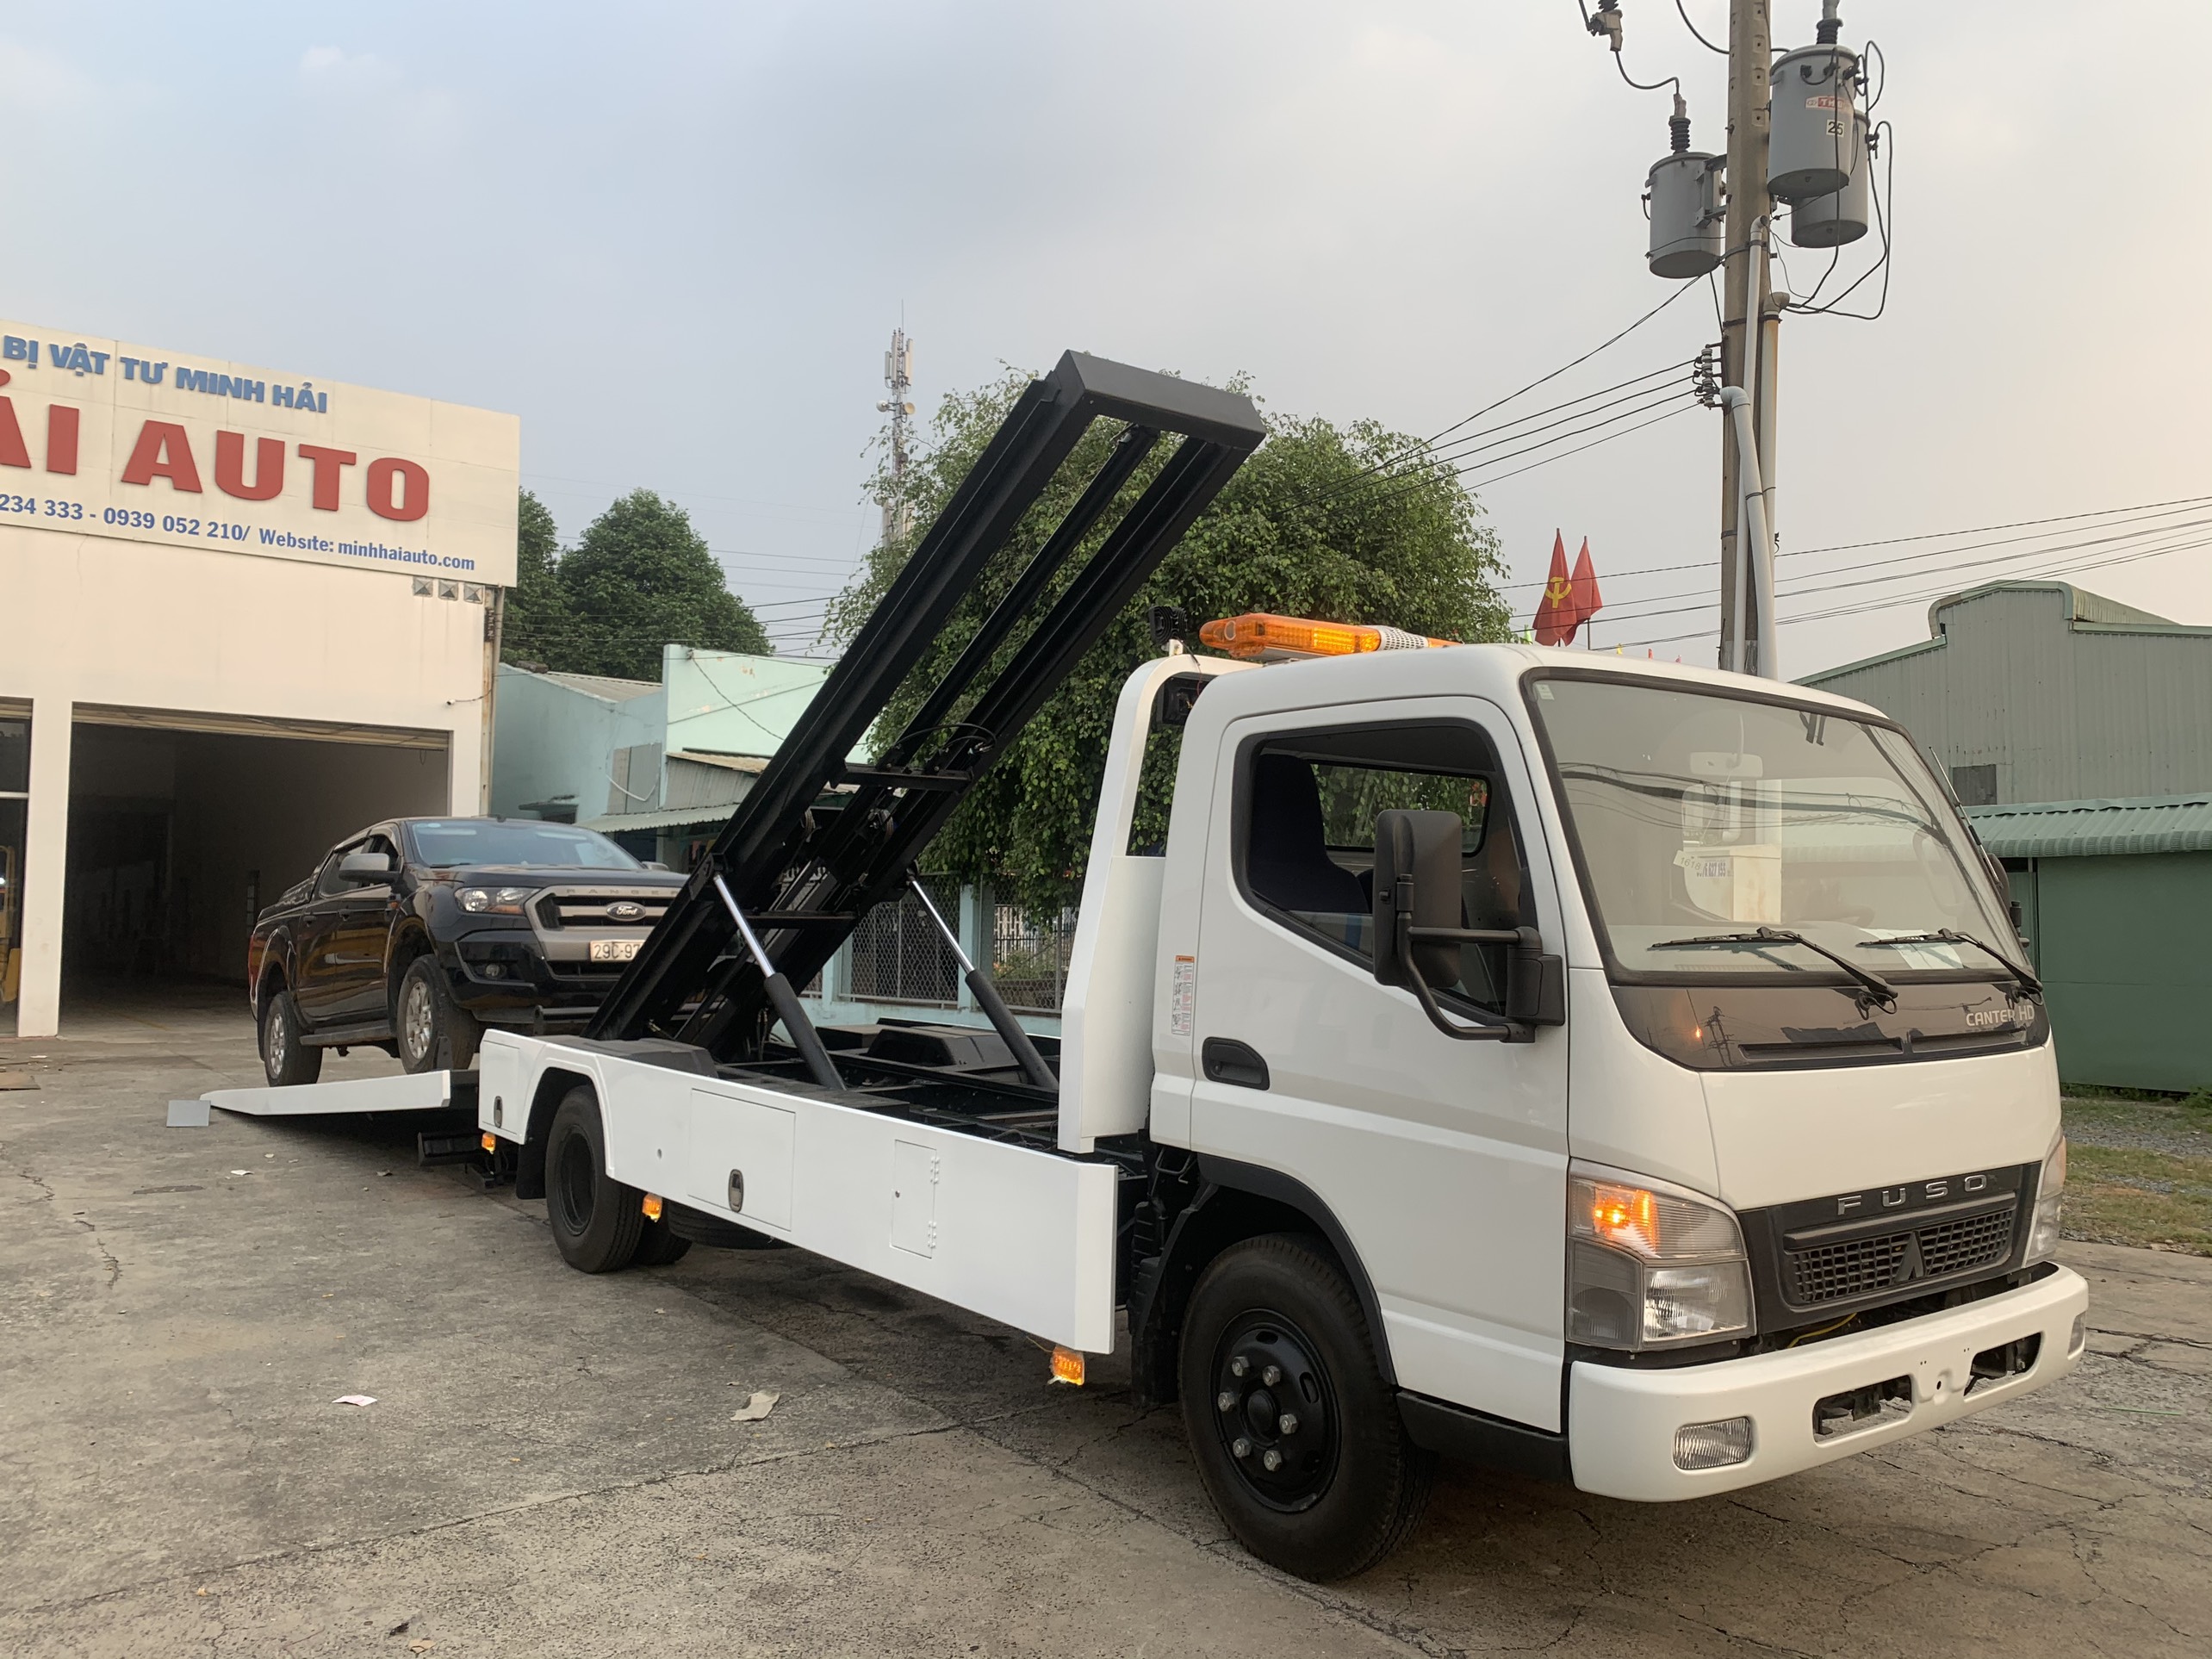 Flatbed wheel lift tow truck durability and reliable